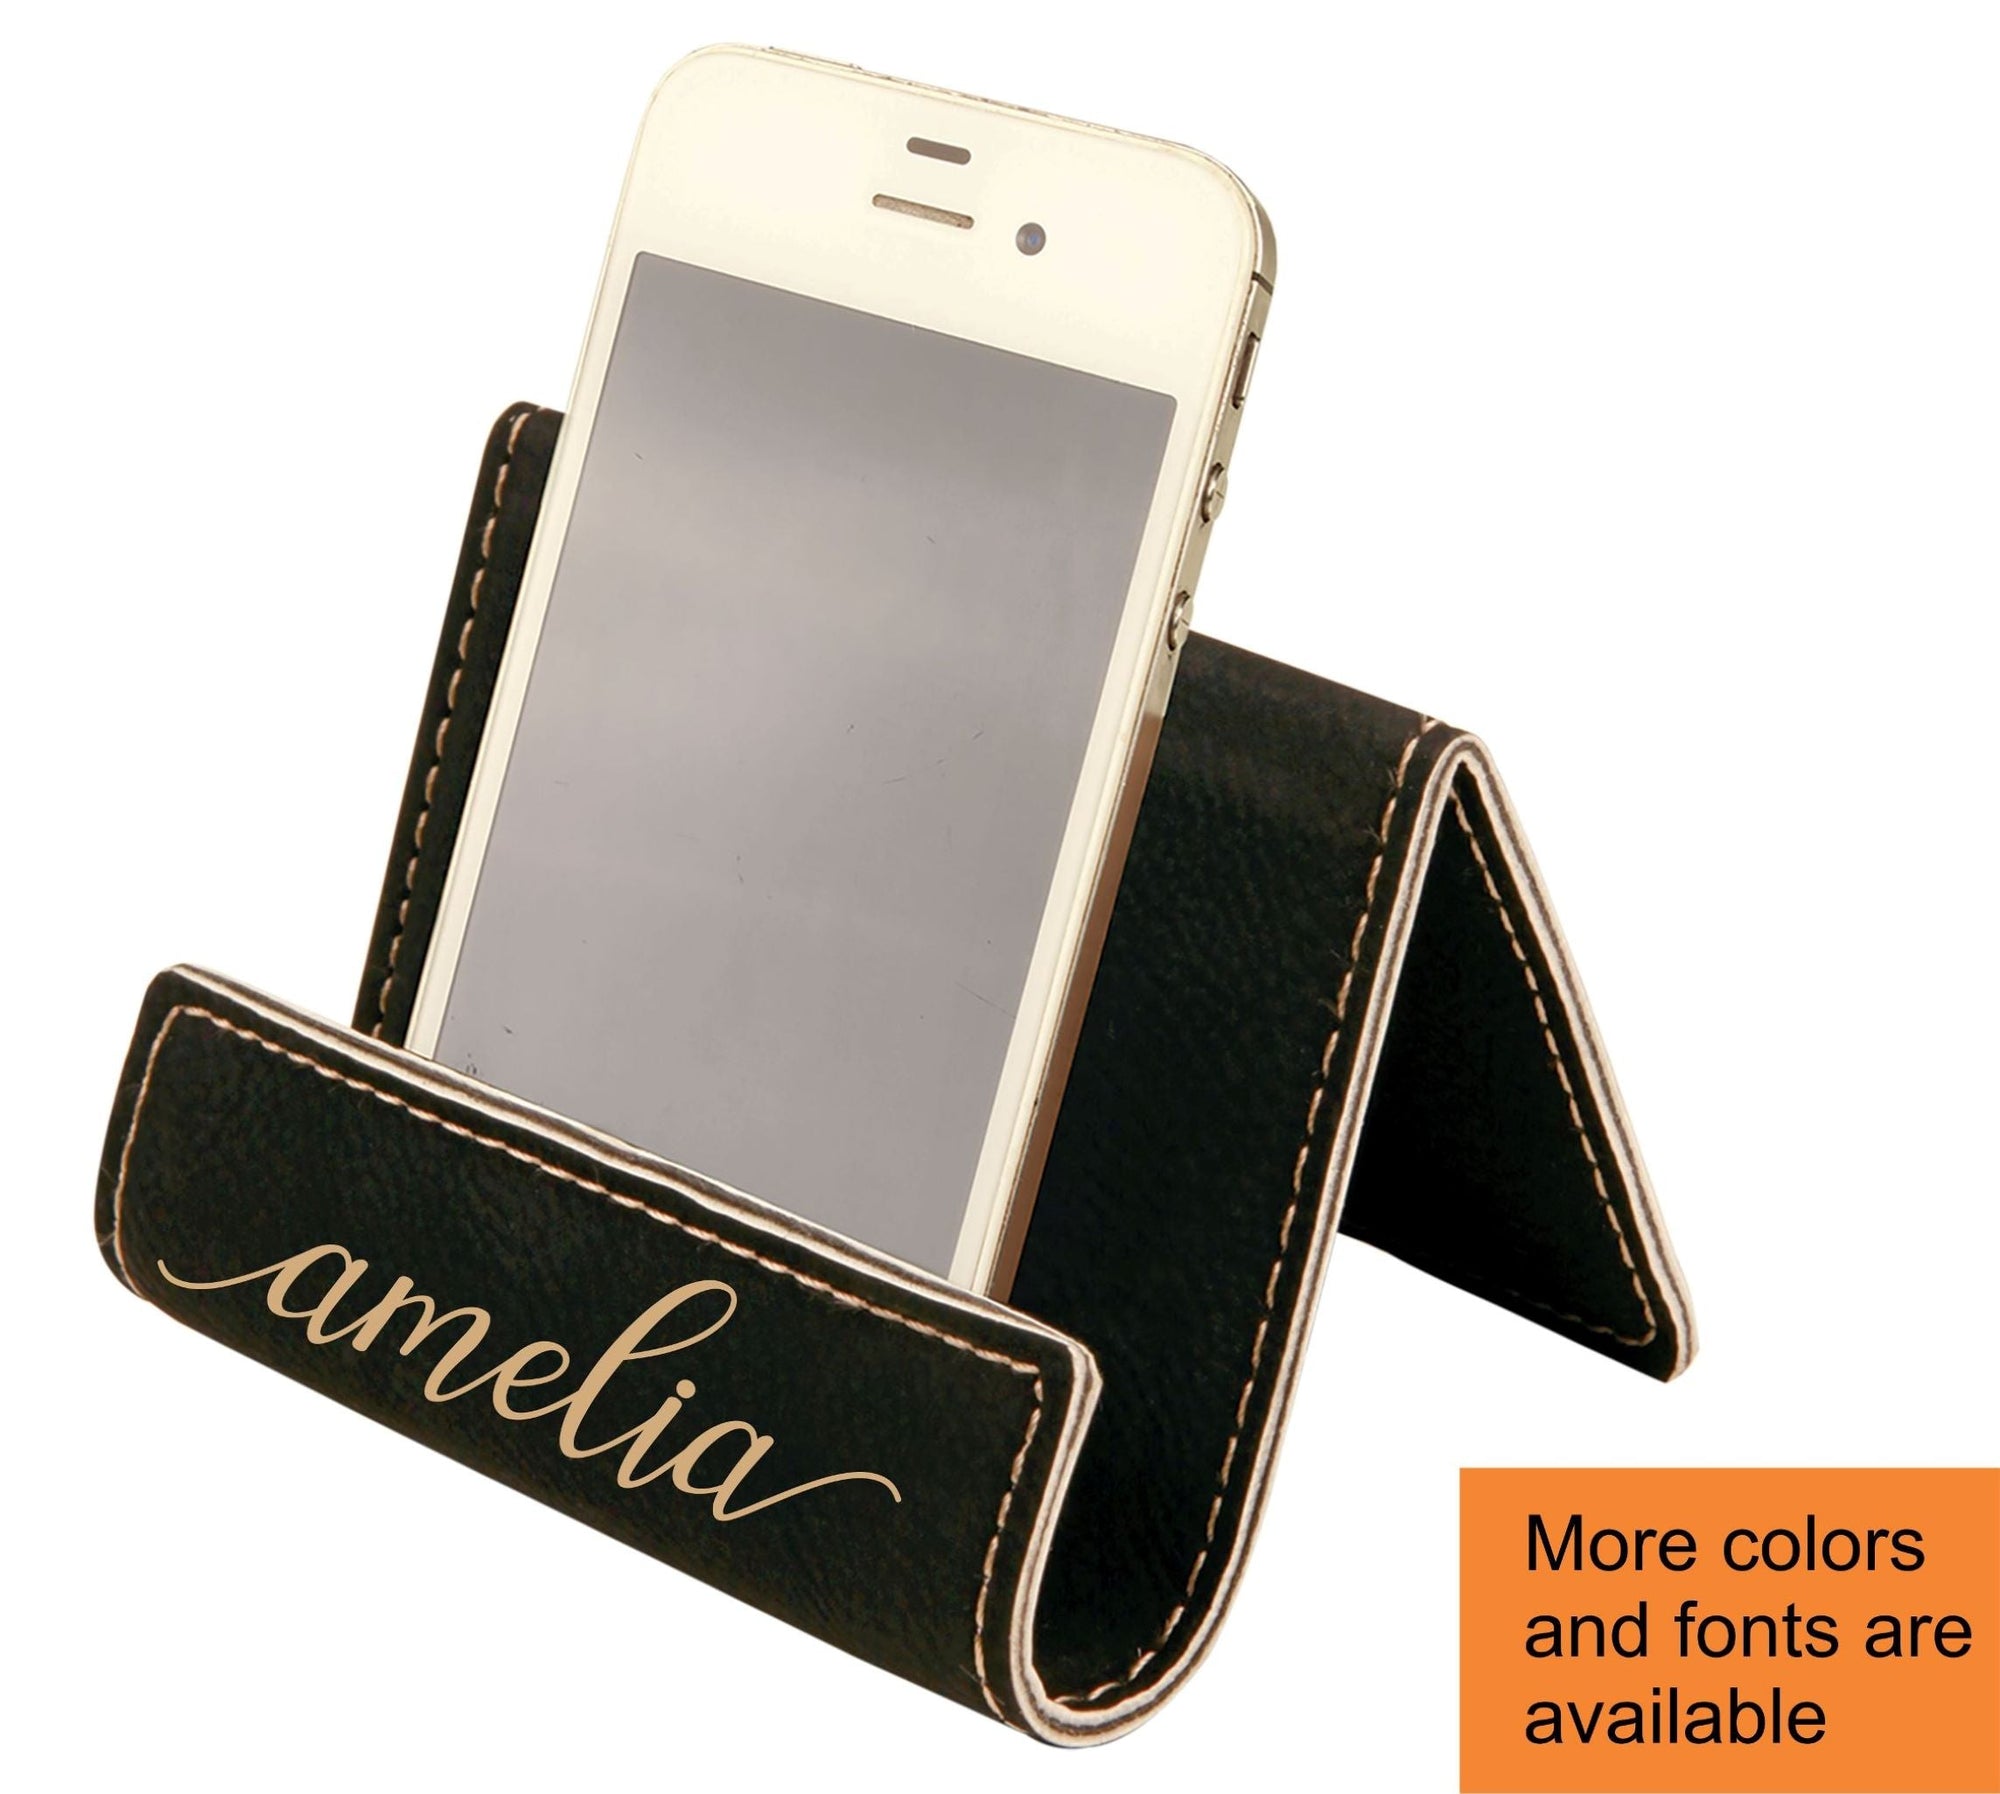 Smart Phone iPad iPhone Stand for Desk |Tablet Holder | Personalized Cell Phone Easel